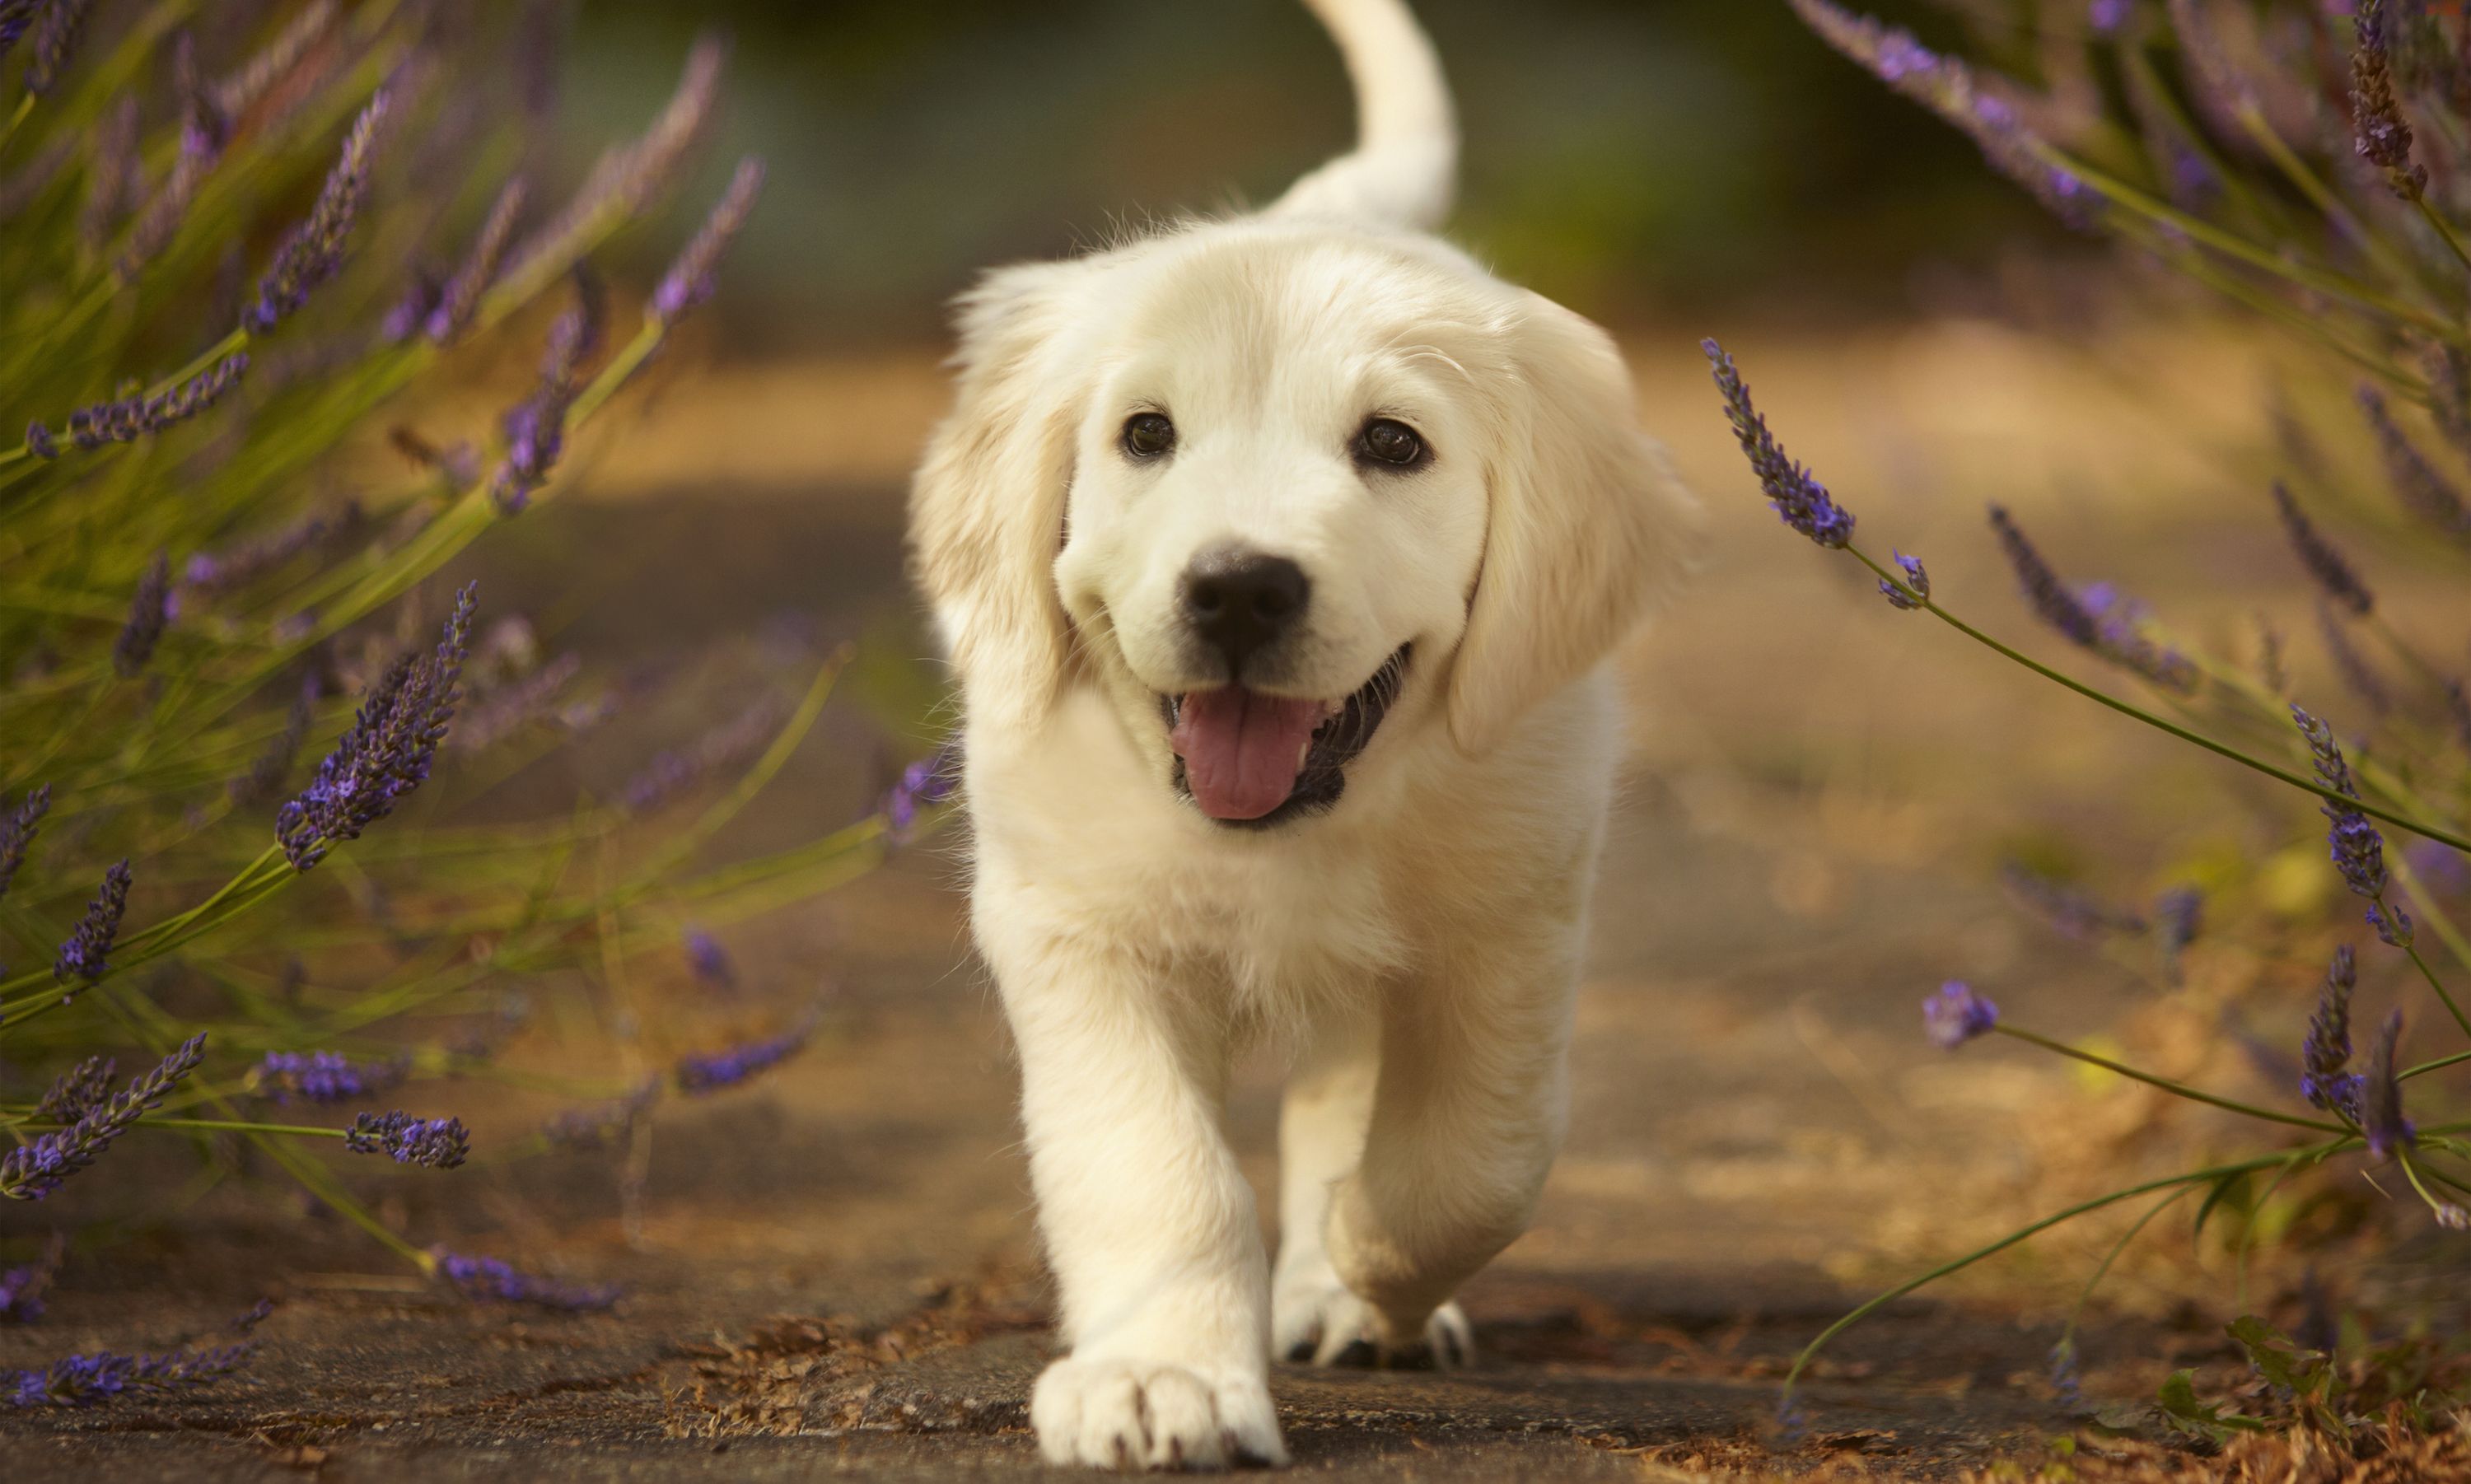 25 Cutest Dog Breeds - Most Adorable Dogs